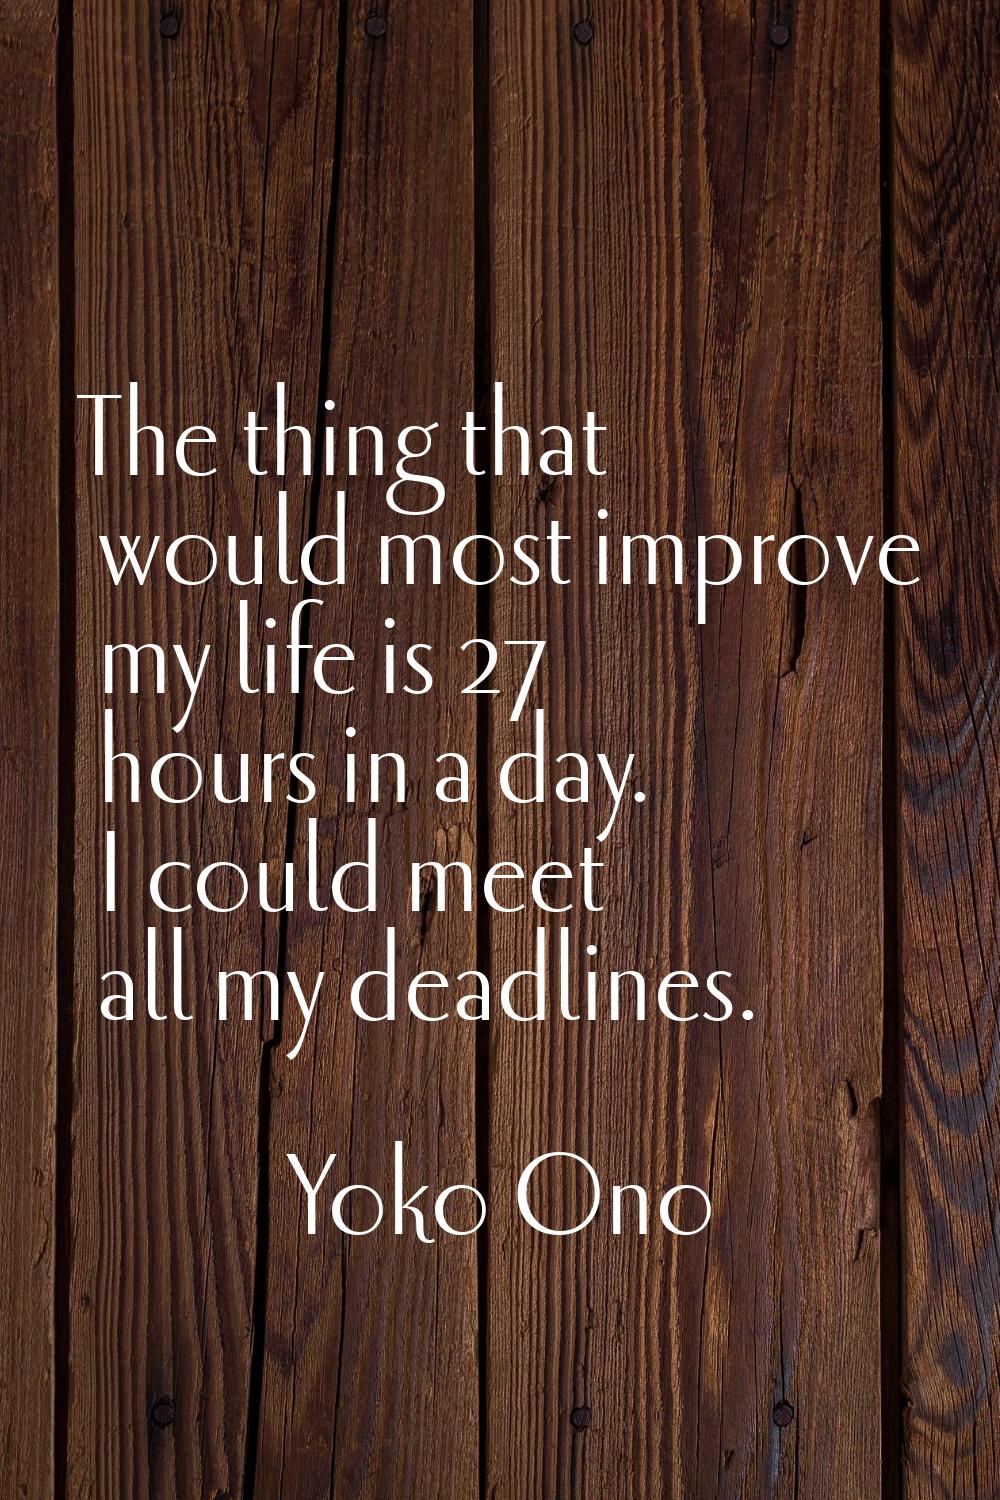 The thing that would most improve my life is 27 hours in a day. I could meet all my deadlines.